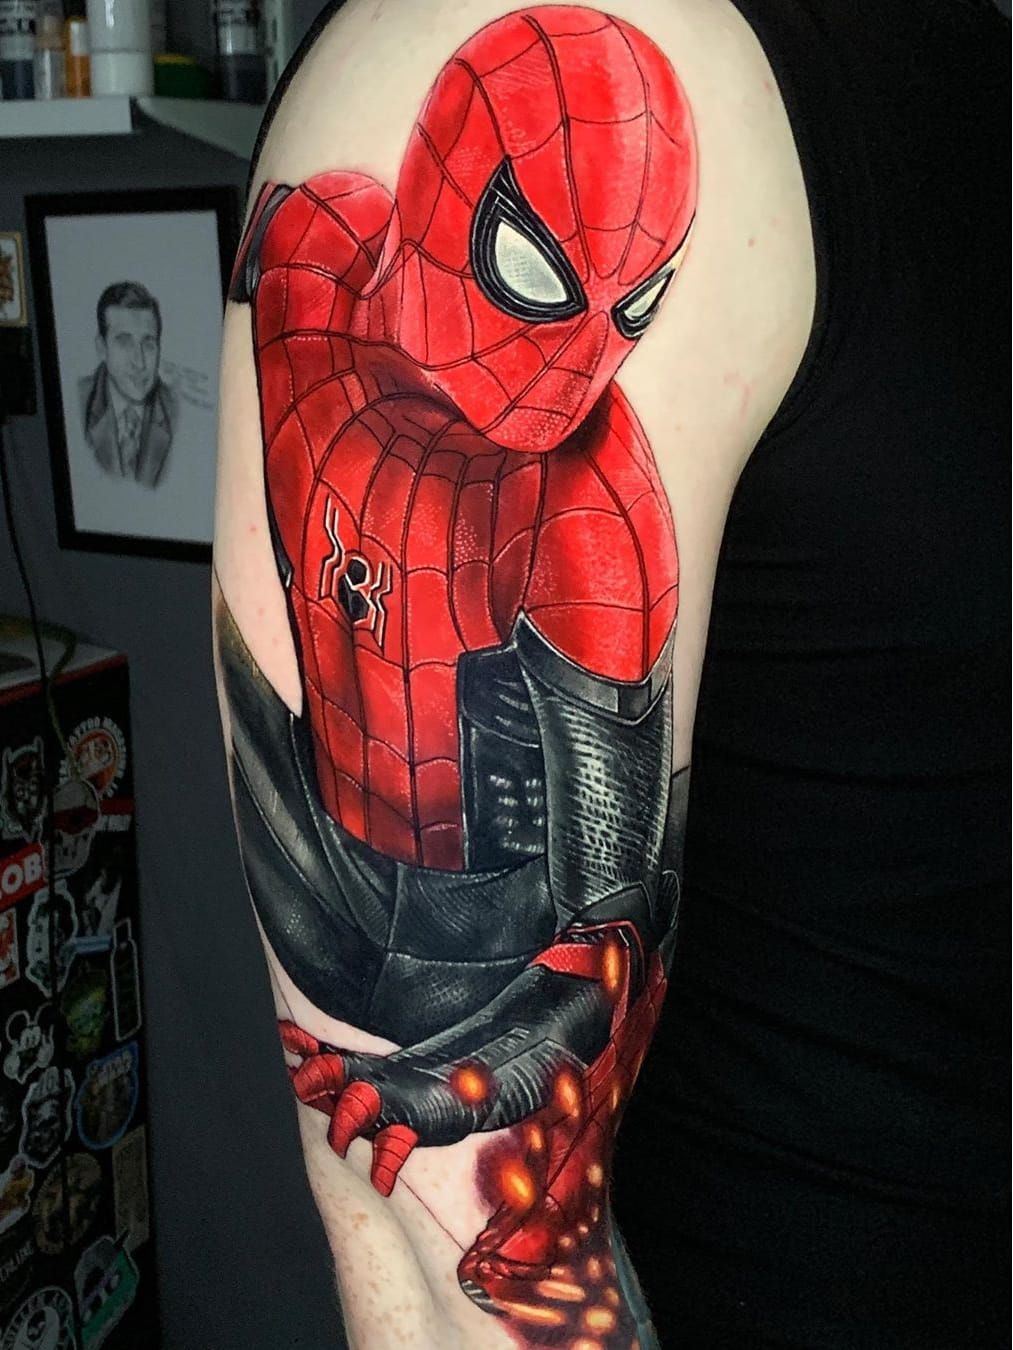 Barber DTS Tattoo Supplies  Wicked Marvel Comic piece by daneinks   barberdts barberdtssupplies barberdtstattoosupplies barberdtsproteam  besttattoos tattoo tattoos bodyart ink tattooartist tattooart inked  tattooed marvel comic 